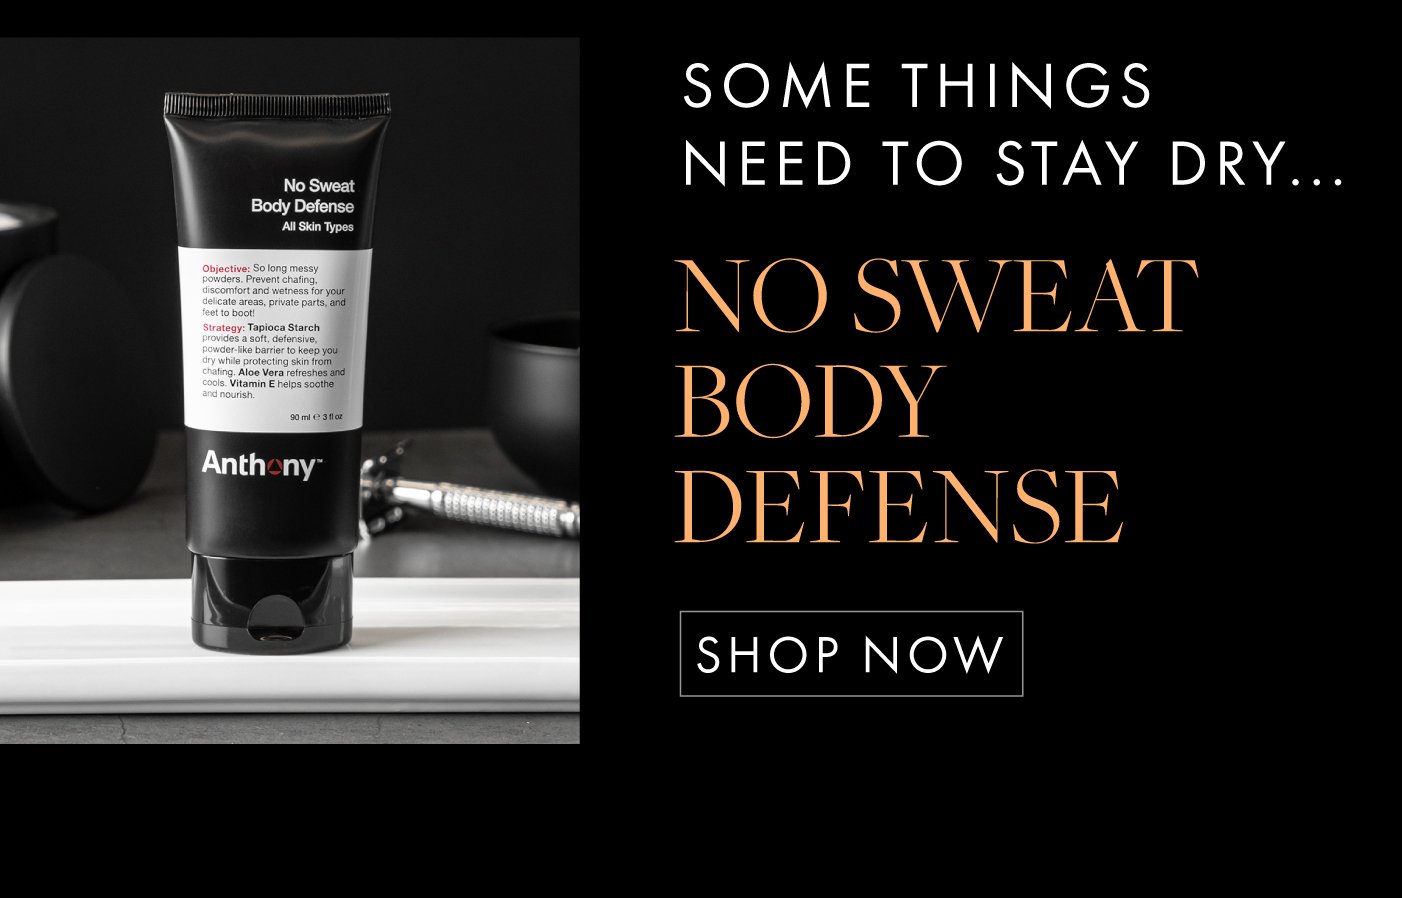 Some things need to stay dry... No Sweat Body Defense